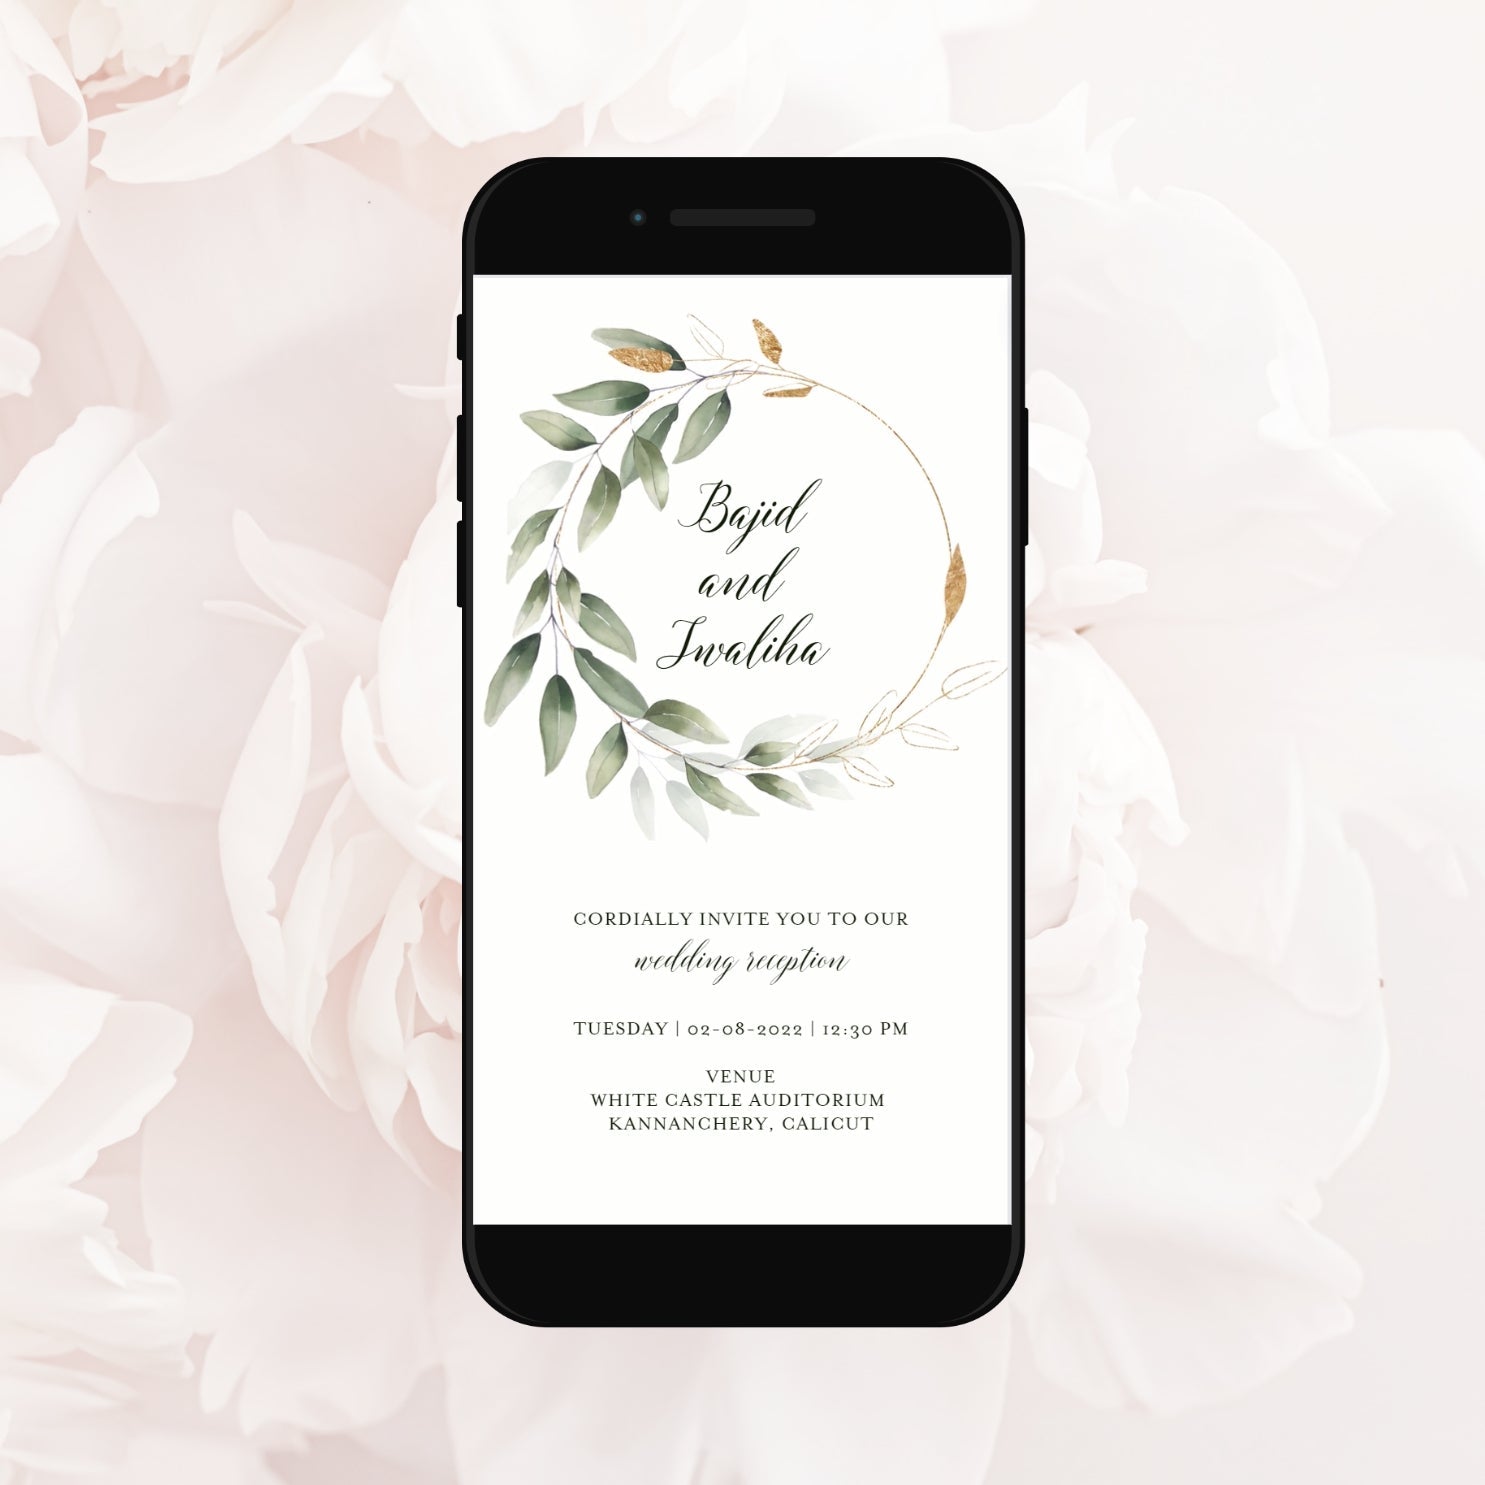 Electronic Wedding Invitation edit in canva, Wedding Mobile Invite, Digital Engagement Party Video Invitations, Instant Download  SAVVY PAPER CO